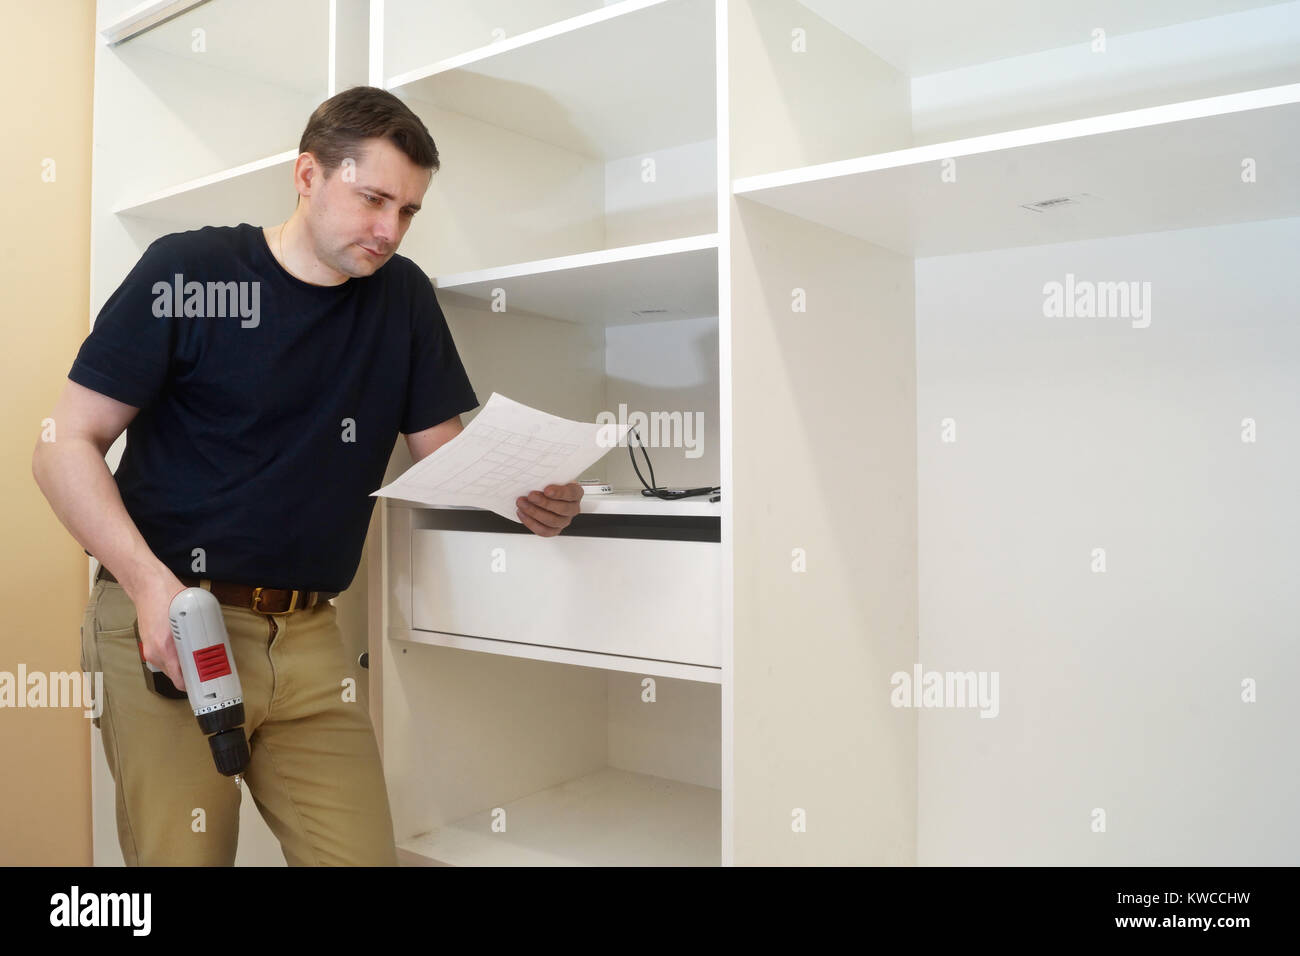 Cabinet assembly. Man with a screwdriver installing bi wardrobe. Stock Photo